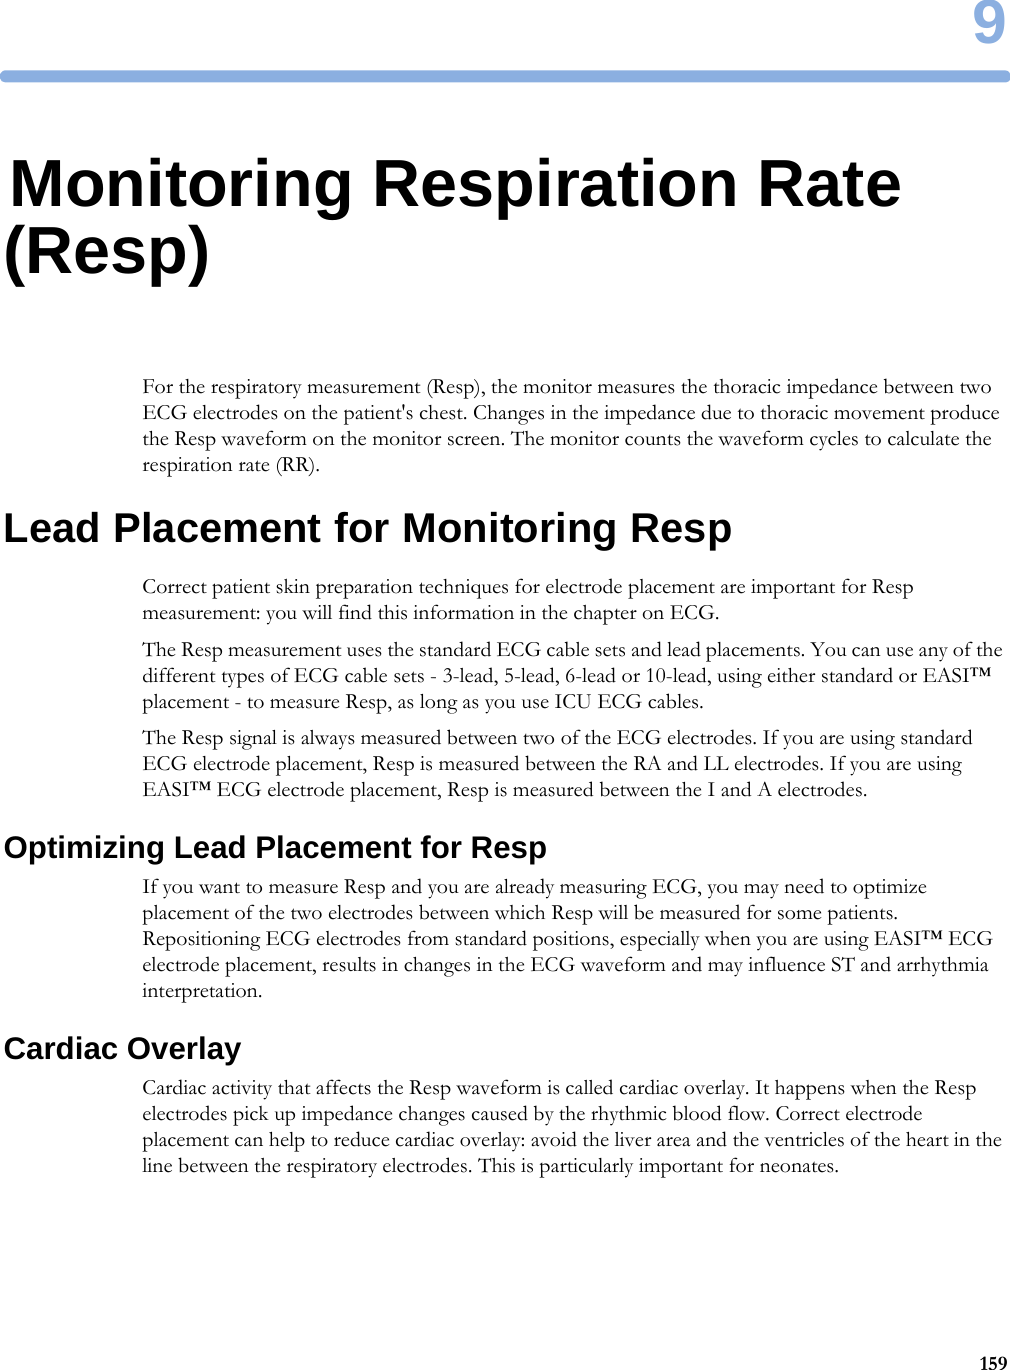 91599Monitoring Respiration Rate (Resp)For the respiratory measurement (Resp), the monitor measures the thoracic impedance between two ECG electrodes on the patient&apos;s chest. Changes in the impedance due to thoracic movement produce the Resp waveform on the monitor screen. The monitor counts the waveform cycles to calculate the respiration rate (RR).Lead Placement for Monitoring RespCorrect patient skin preparation techniques for electrode placement are important for Resp measurement: you will find this information in the chapter on ECG.The Resp measurement uses the standard ECG cable sets and lead placements. You can use any of the different types of ECG cable sets - 3-lead, 5-lead, 6-lead or 10-lead, using either standard or EASI™ placement - to measure Resp, as long as you use ICU ECG cables.The Resp signal is always measured between two of the ECG electrodes. If you are using standard ECG electrode placement, Resp is measured between the RA and LL electrodes. If you are using EASI™ ECG electrode placement, Resp is measured between the I and A electrodes.Optimizing Lead Placement for RespIf you want to measure Resp and you are already measuring ECG, you may need to optimize placement of the two electrodes between which Resp will be measured for some patients. Repositioning ECG electrodes from standard positions, especially when you are using EASI™ ECG electrode placement, results in changes in the ECG waveform and may influence ST and arrhythmia interpretation.Cardiac OverlayCardiac activity that affects the Resp waveform is called cardiac overlay. It happens when the Resp electrodes pick up impedance changes caused by the rhythmic blood flow. Correct electrode placement can help to reduce cardiac overlay: avoid the liver area and the ventricles of the heart in the line between the respiratory electrodes. This is particularly important for neonates.